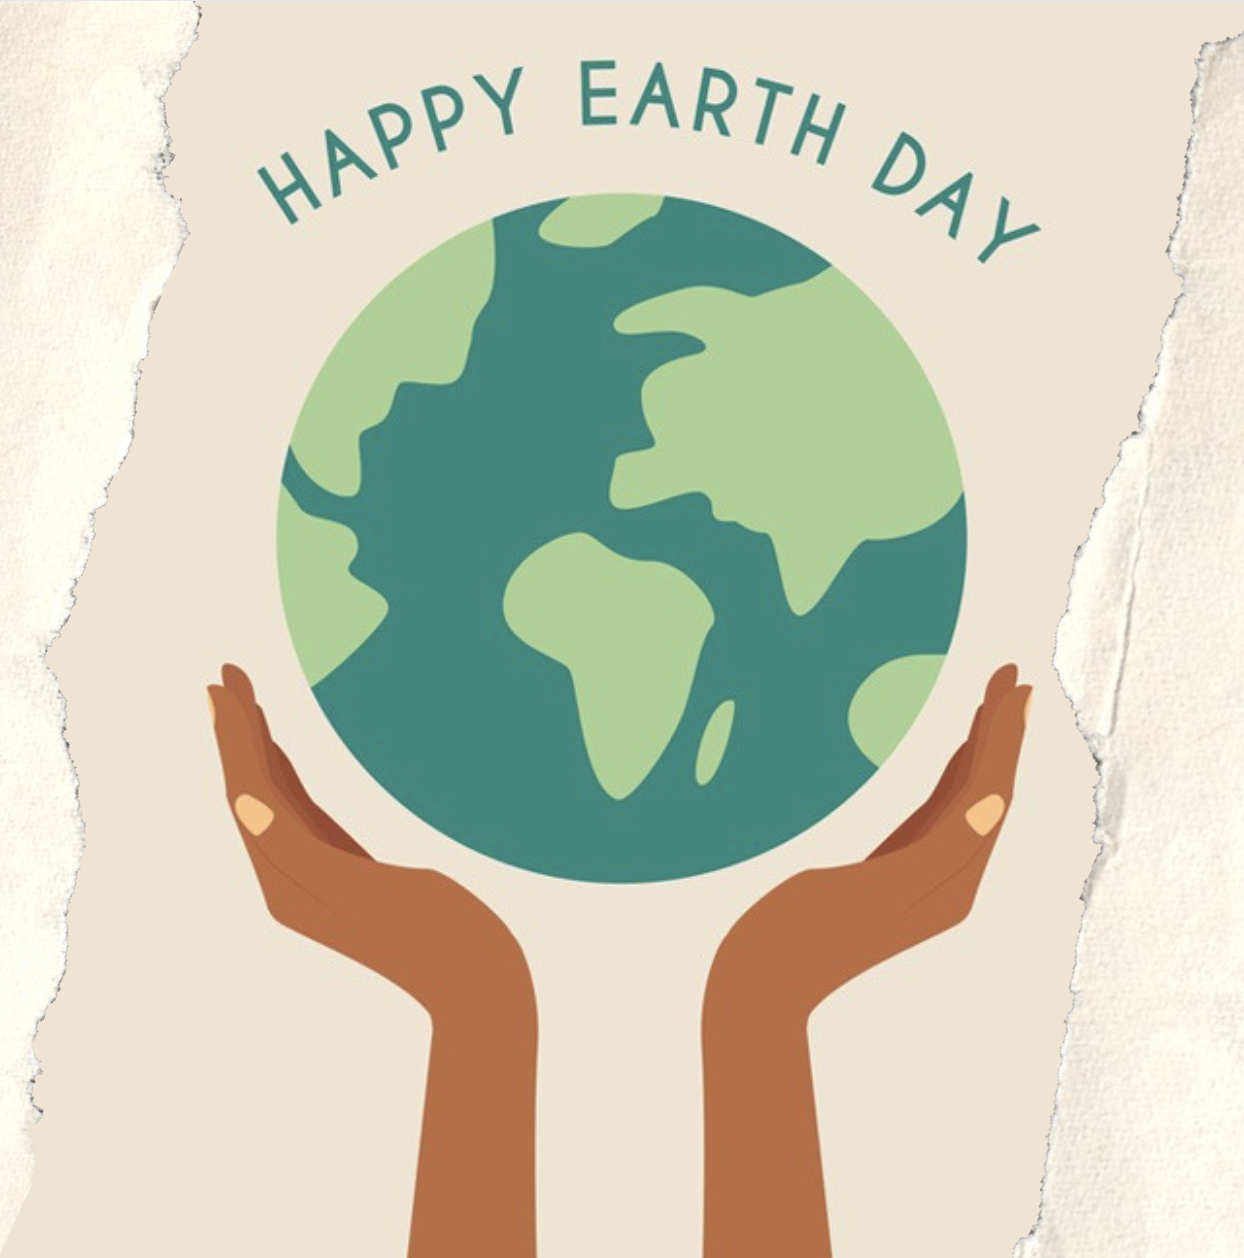 Celebrating Earth Day With Good News For The Planet!